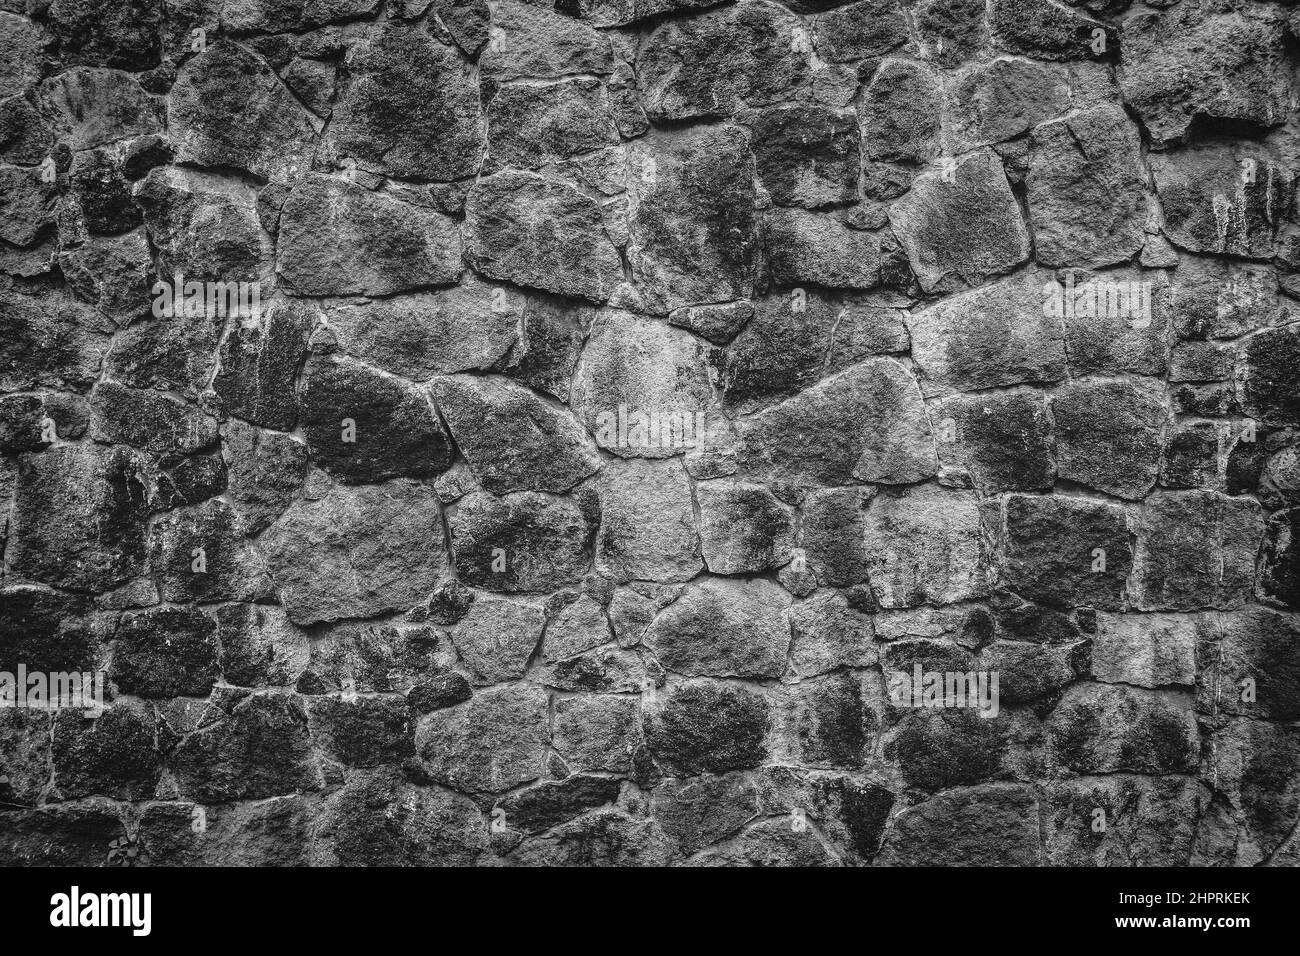 Abstract traditional stone wall pavement texture background. Bumpy textured stonewall made from flagstone and slabstone. Stock Photo